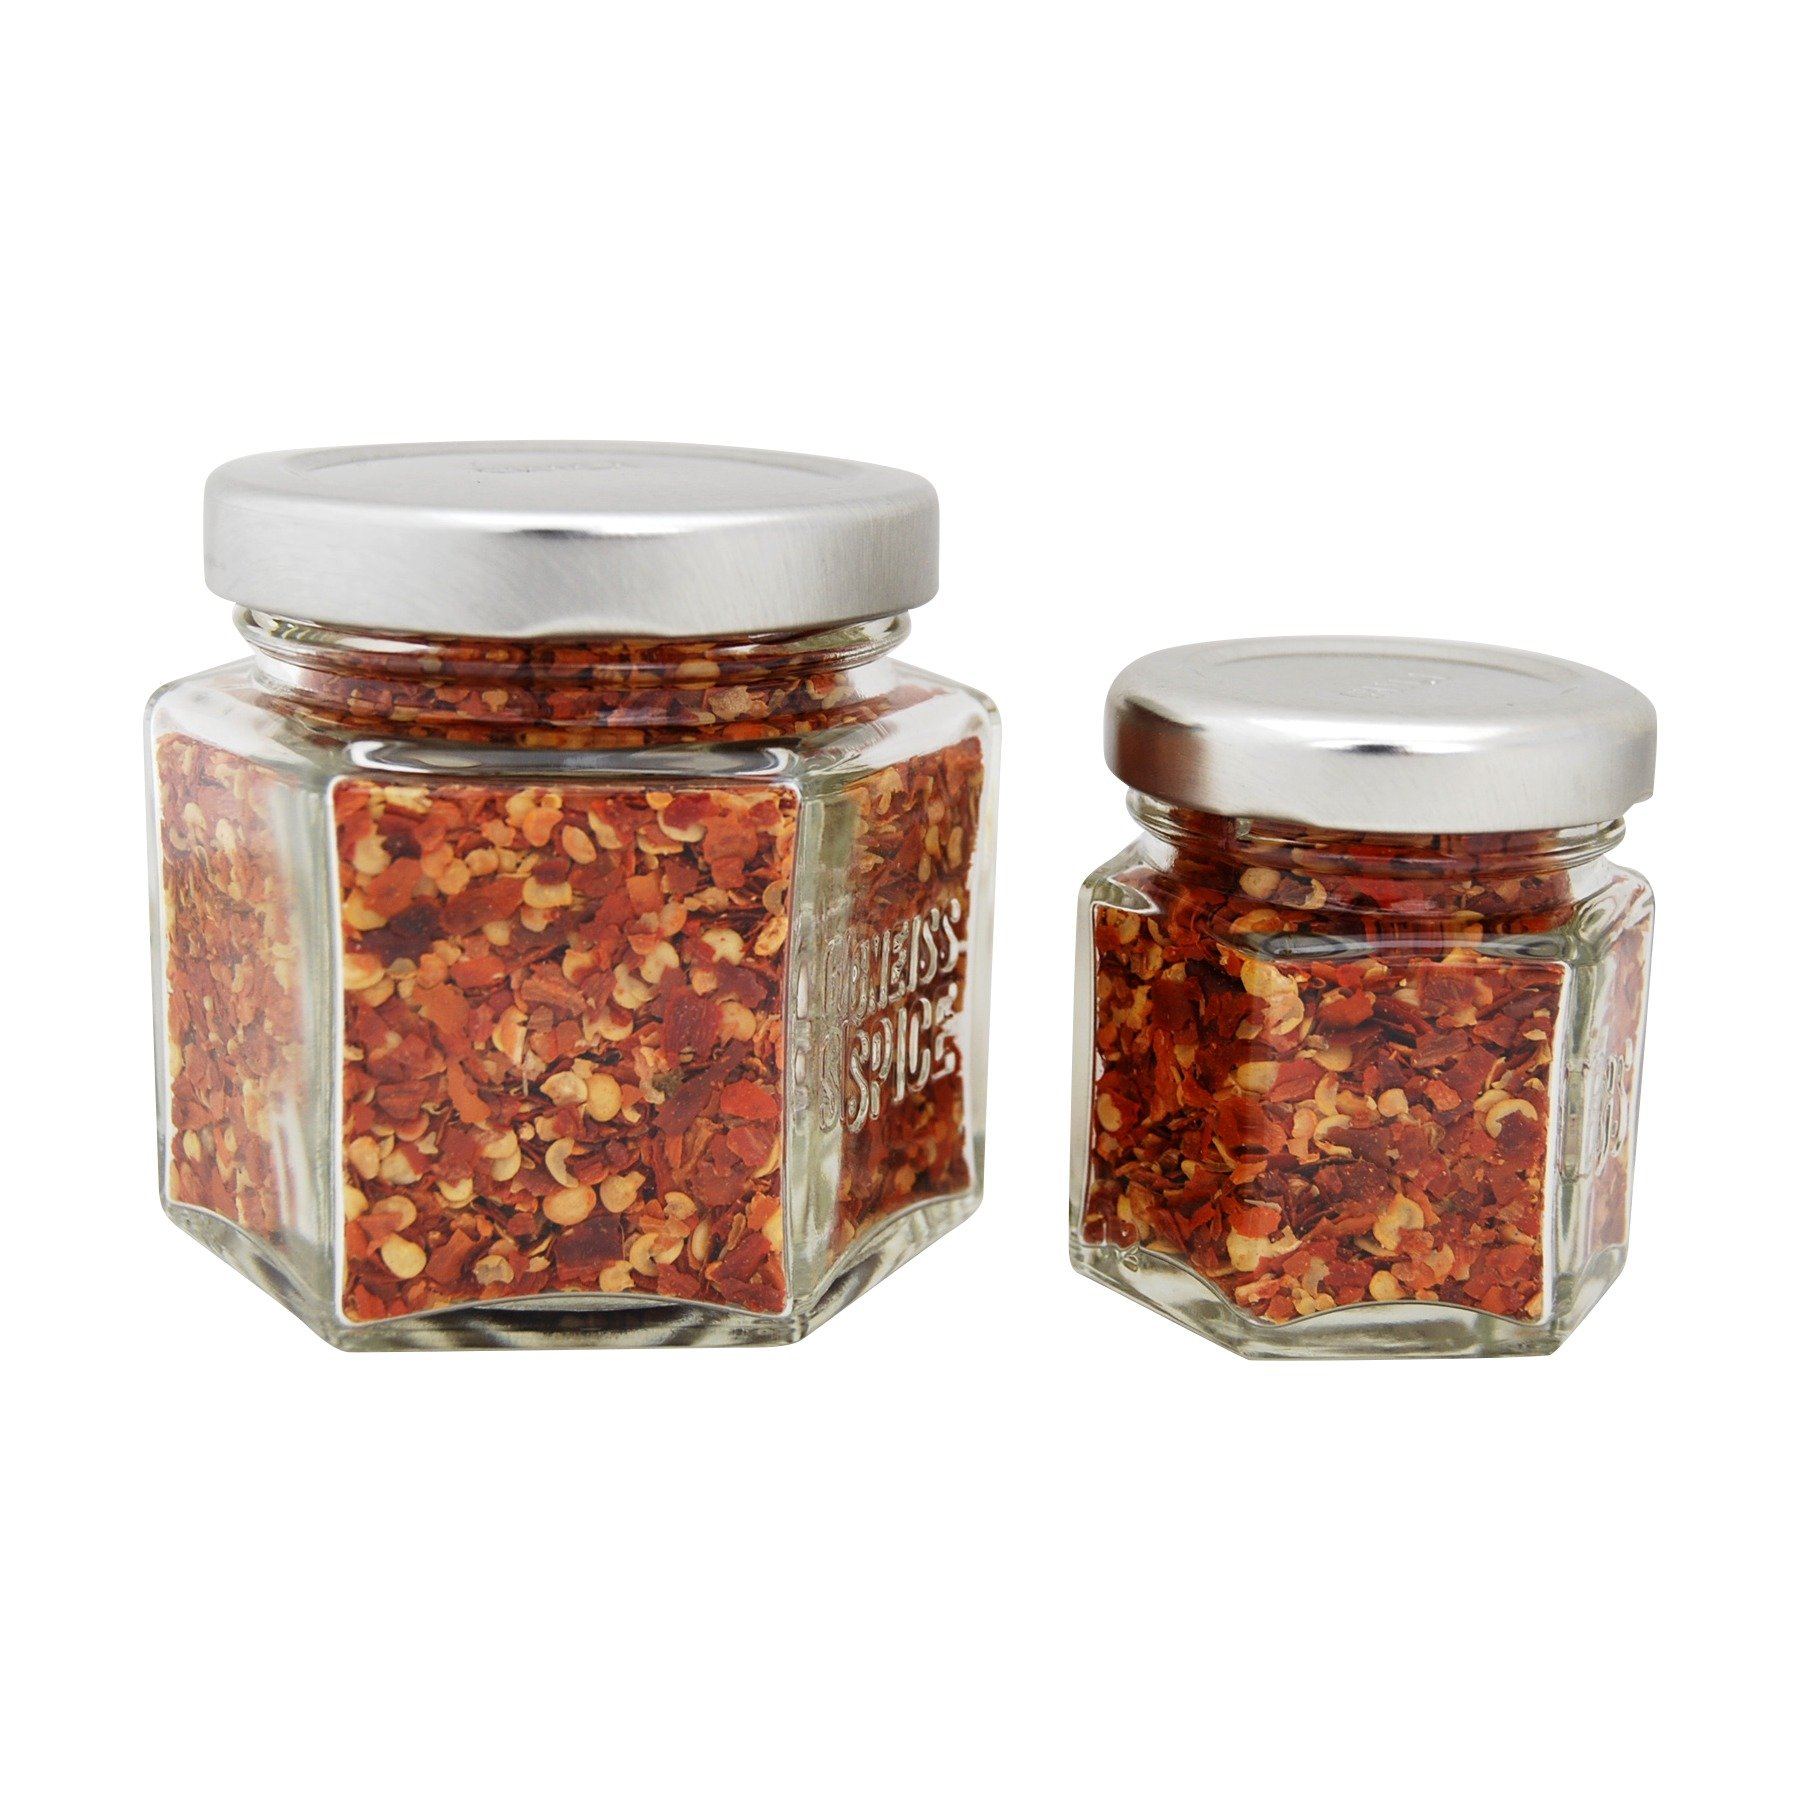 https://gneissspice.com/cdn/shop/products/your-choice-of-organic-spices-12-large-magnetic-jars-9.jpg?v=1541653459